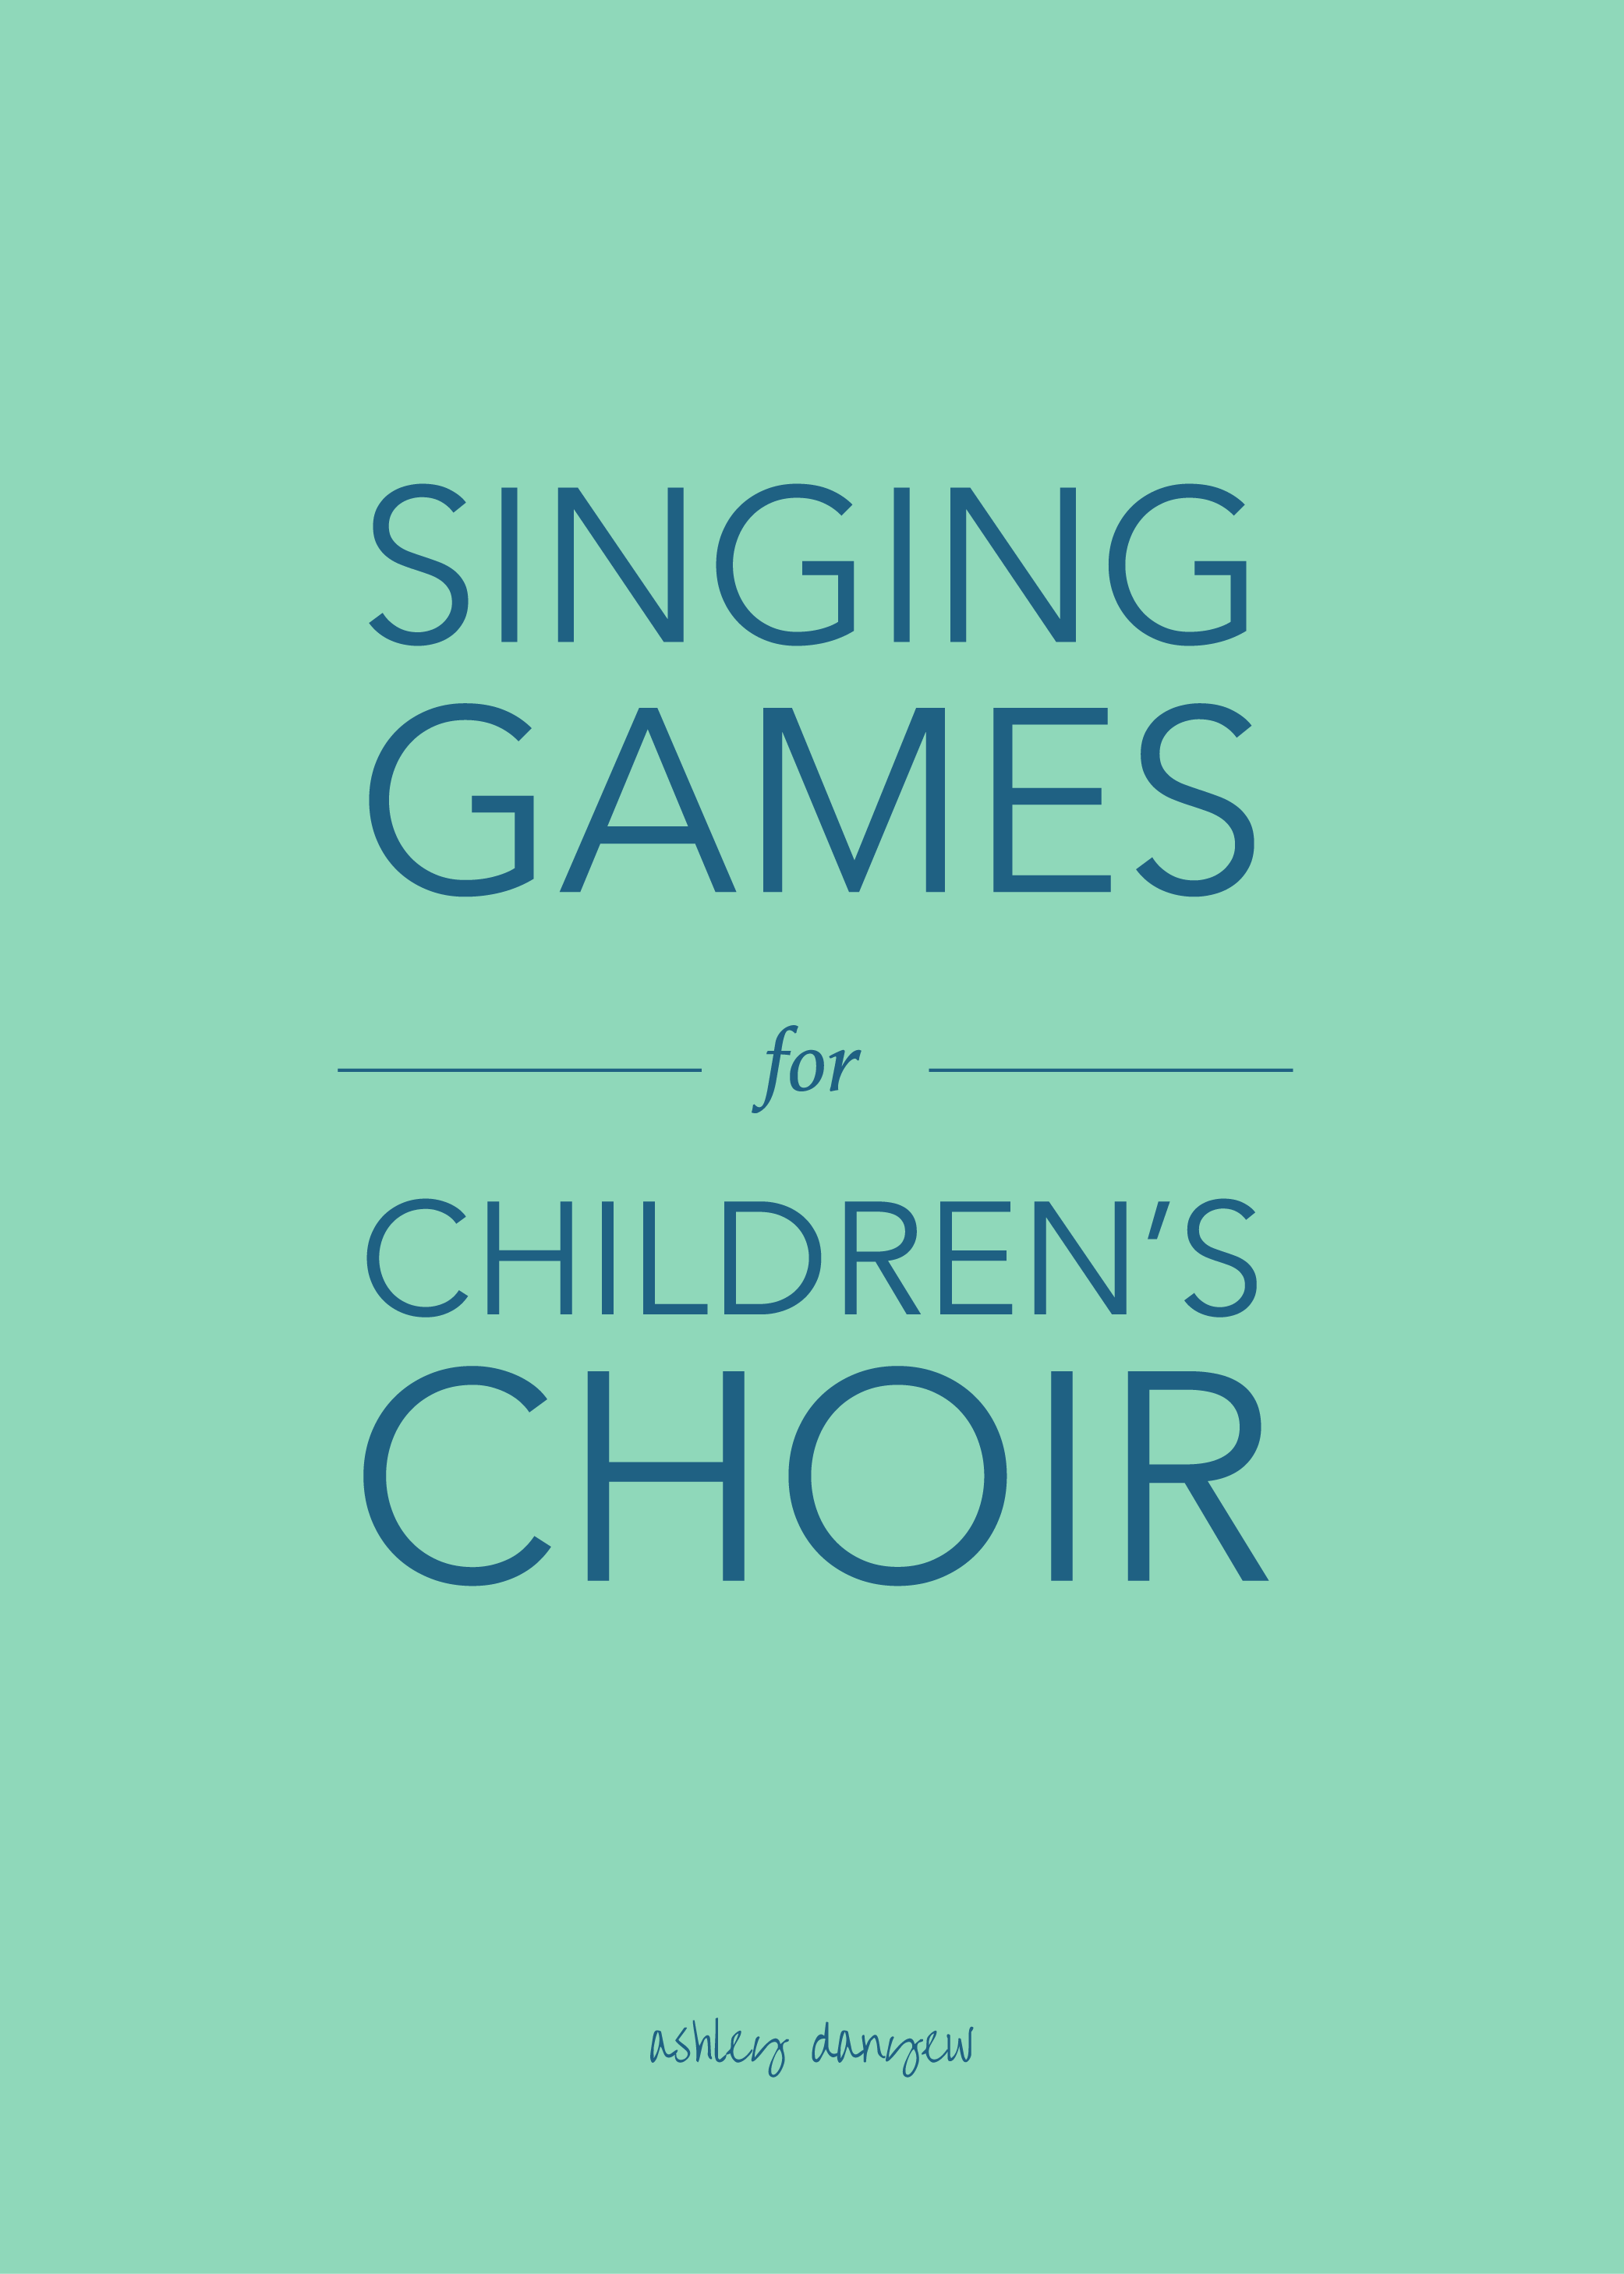 Singing Games for Children's Choir-01.png